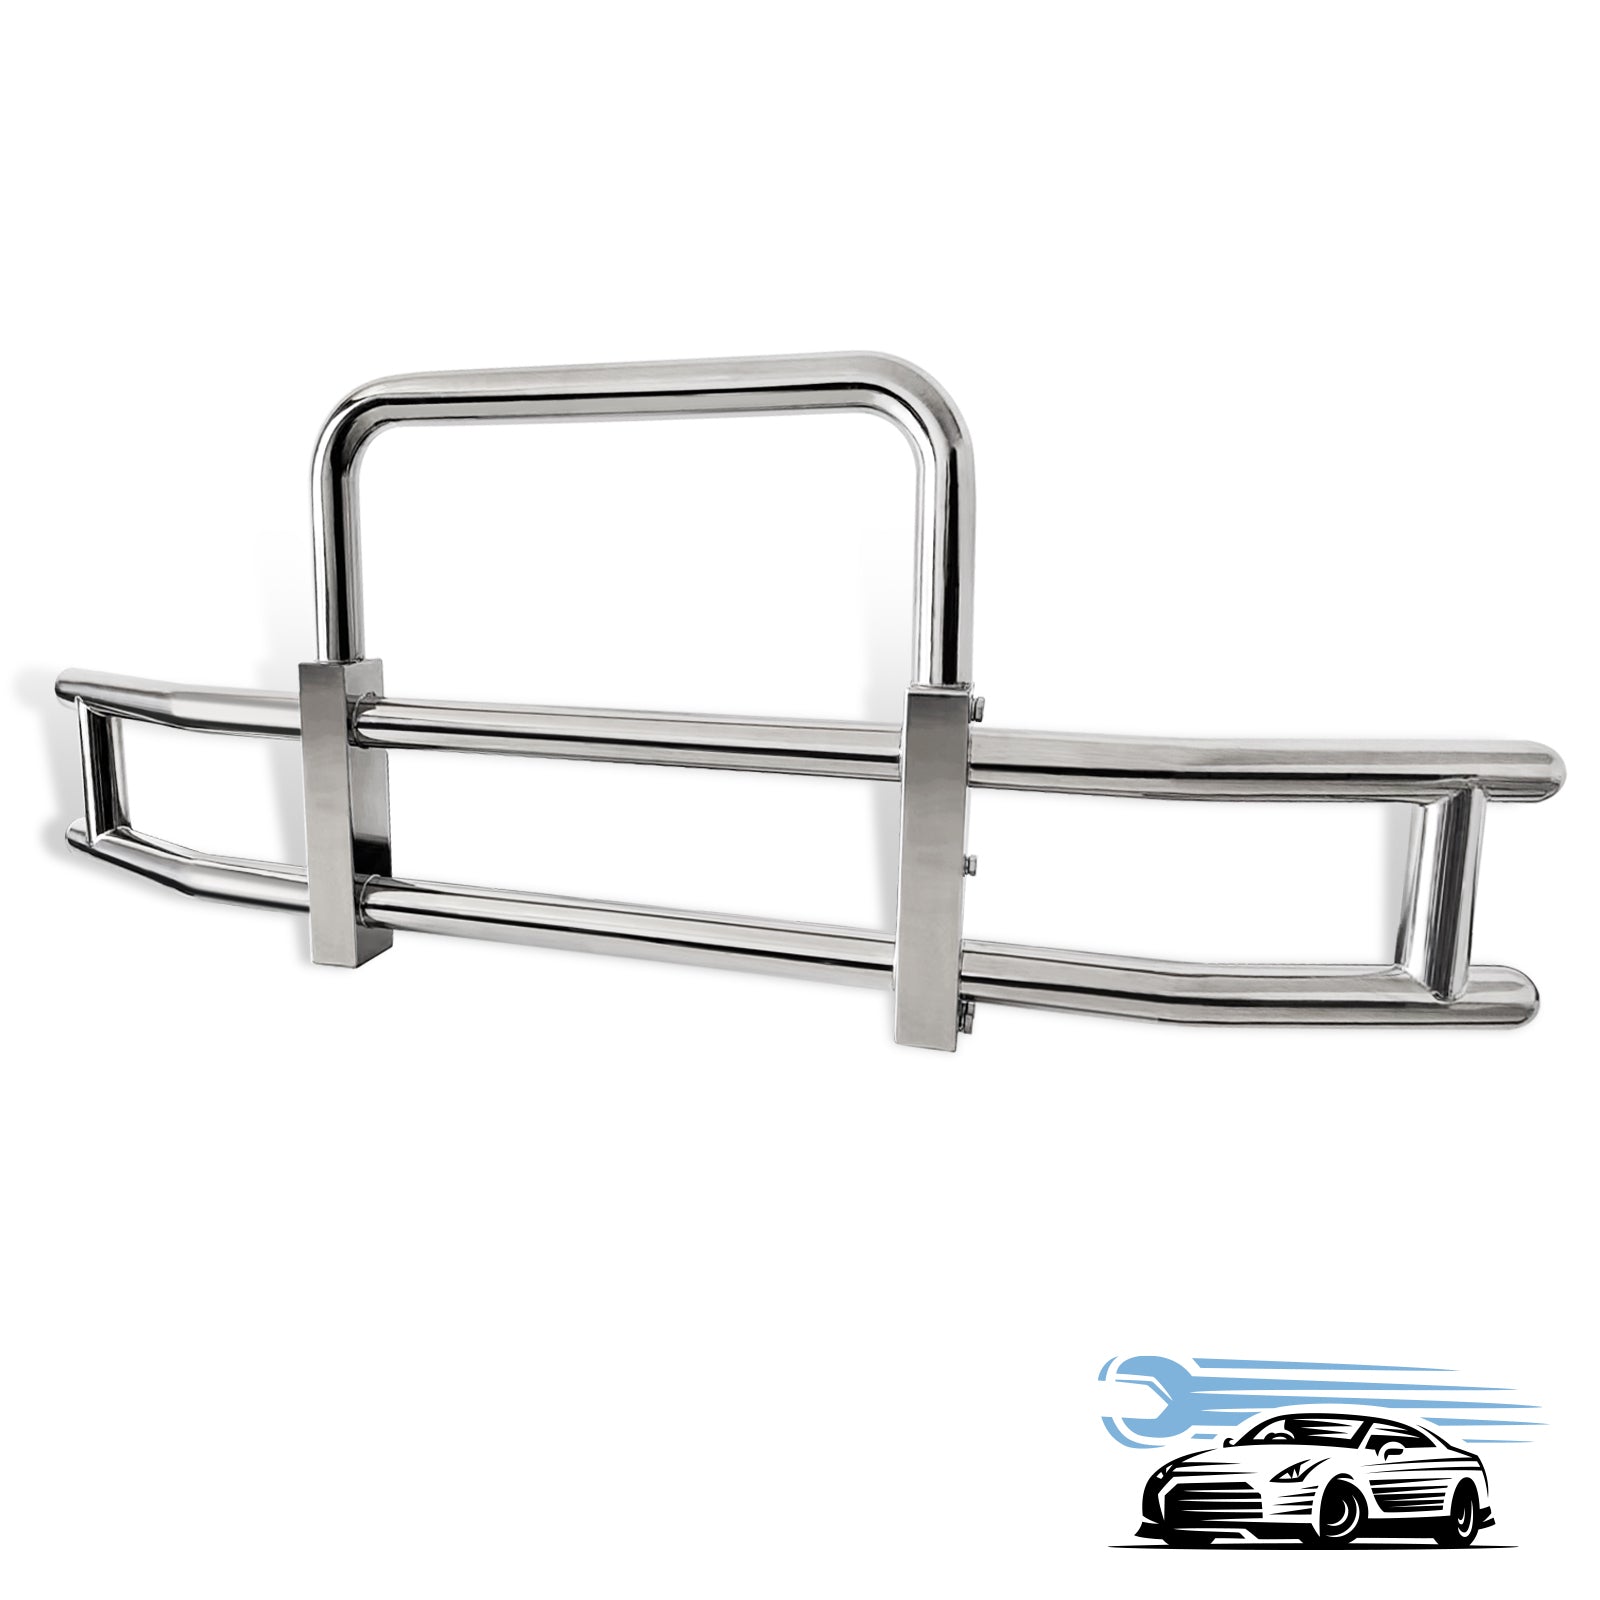 Deer Guard for Freightliner Cascadia 2008 2017 with chrome-stainless steel